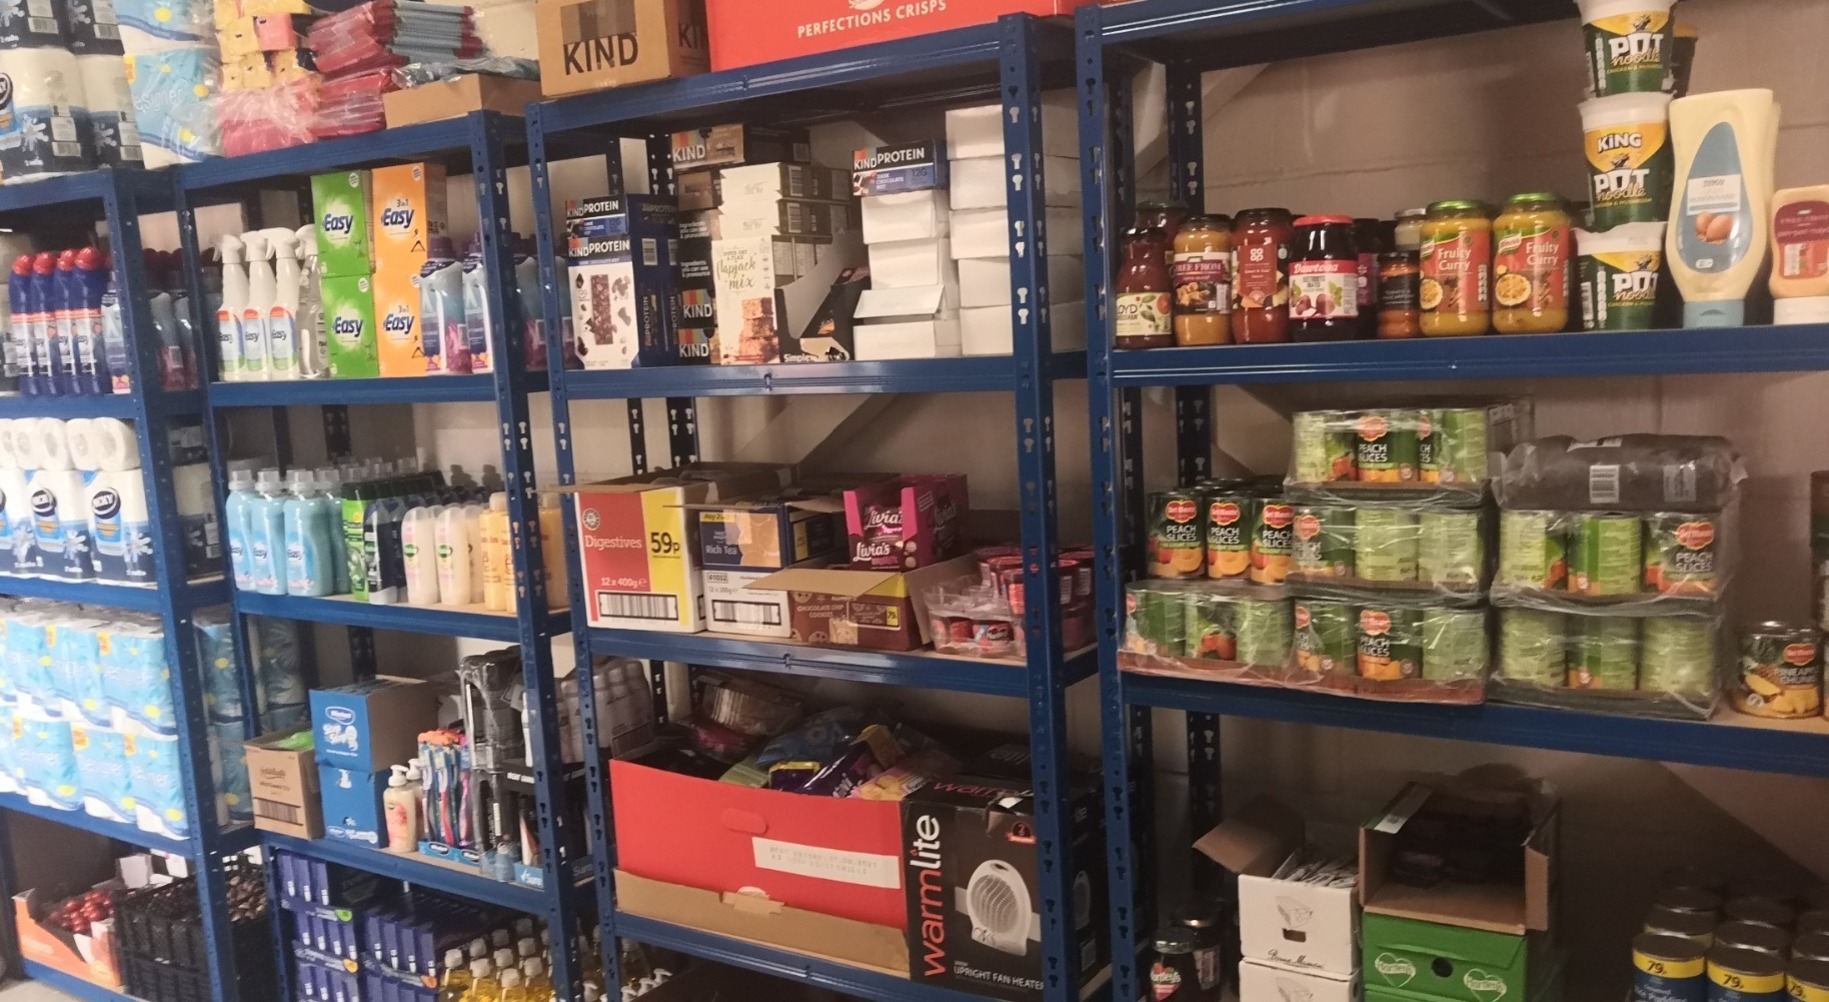 Allwell Care's foodbank collection